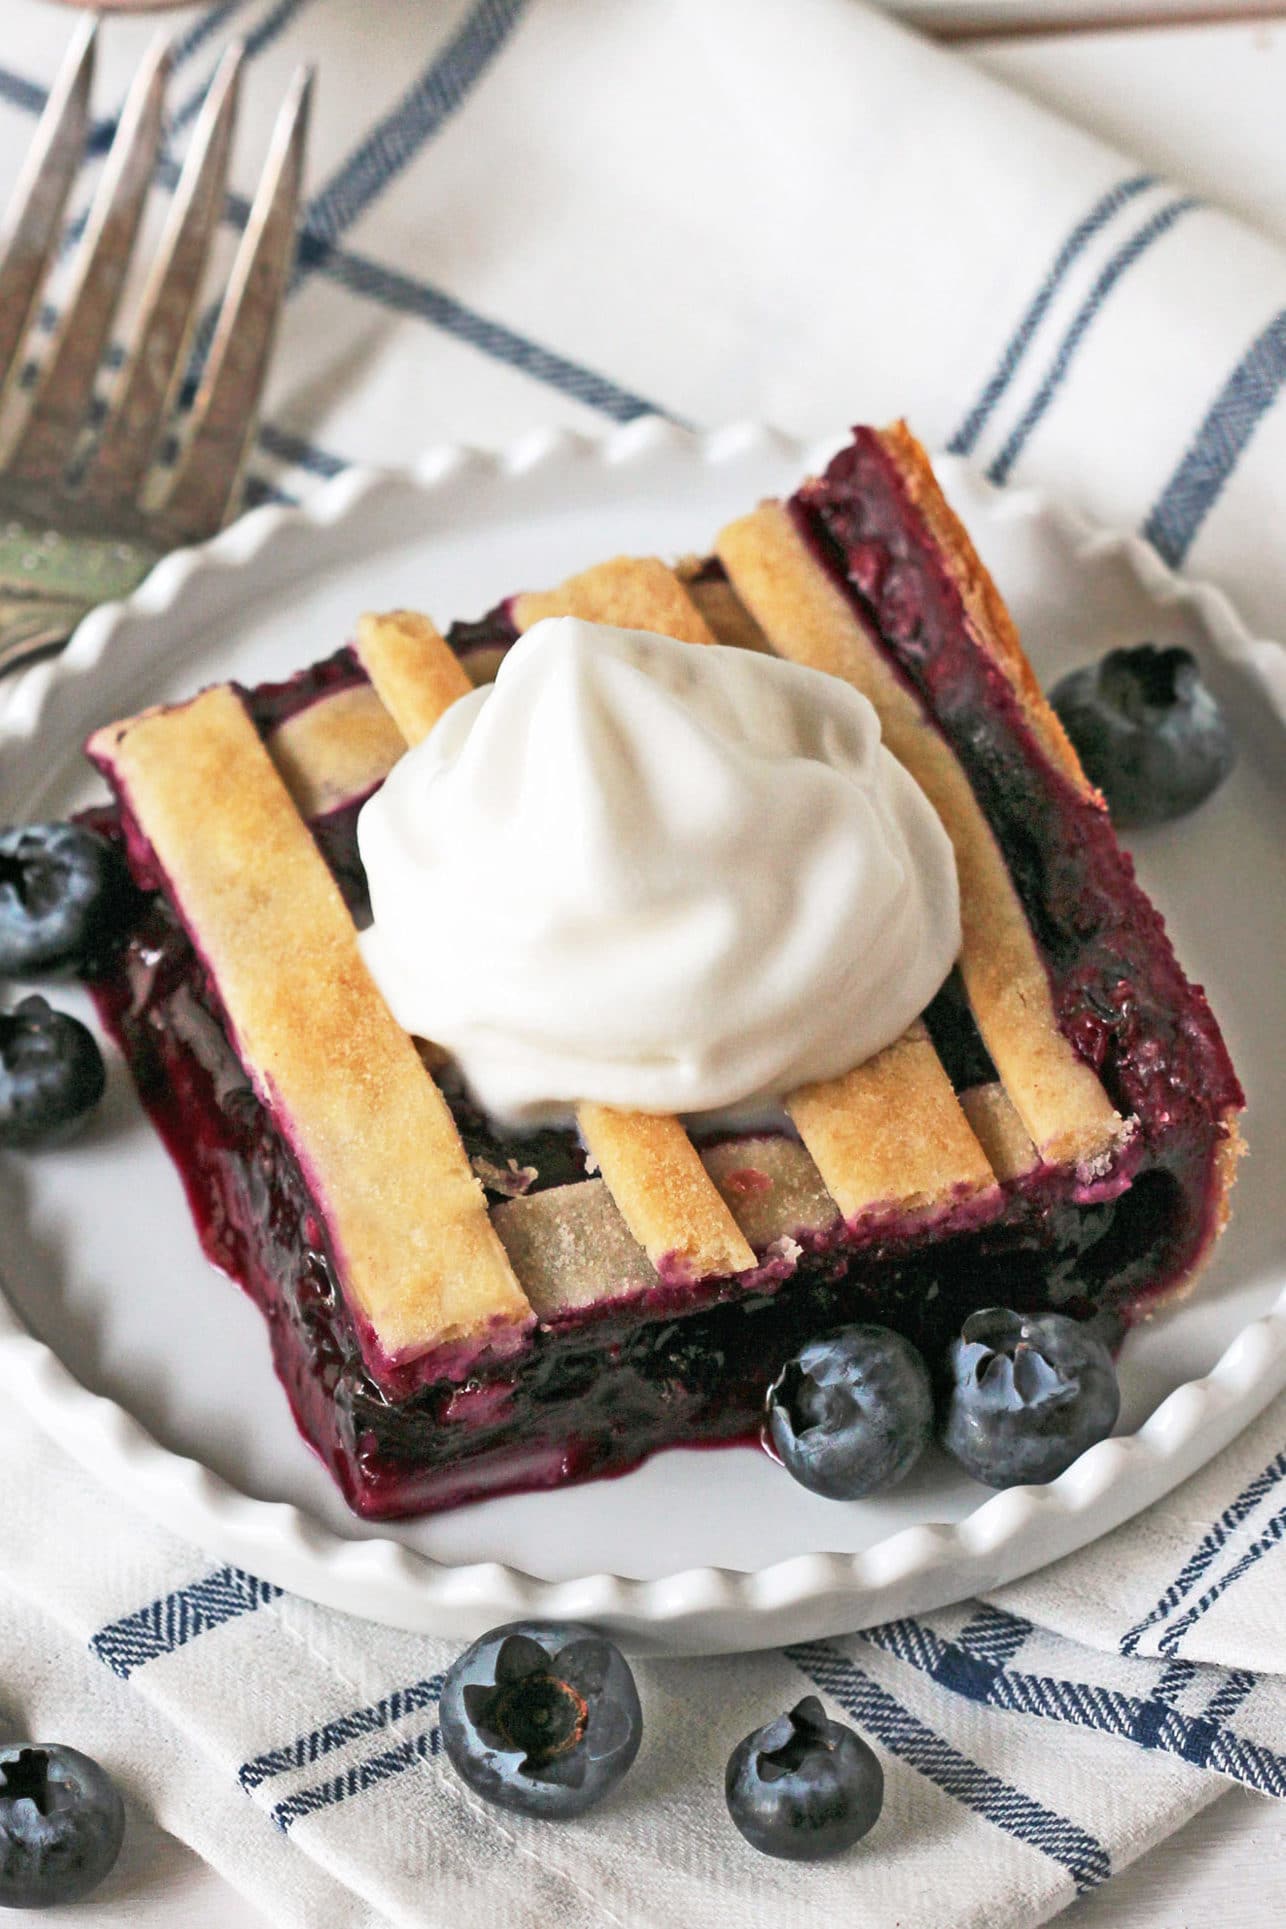 These 5-ingredient Blueberry Lattice Bars are a guaranteed crowdpleaser! Bursting with sweet, fresh blueberry flavor, plus a buttery pie crust, you'd never know they're vegan, low fat, contain no added sugar, and are totally guilt free! Healthy Dessert Recipes with sugar free, low calorie, low carb, high protein, and gluten free options at the Desserts With Benefits Blog (www.DessertsWithBenefits.com)